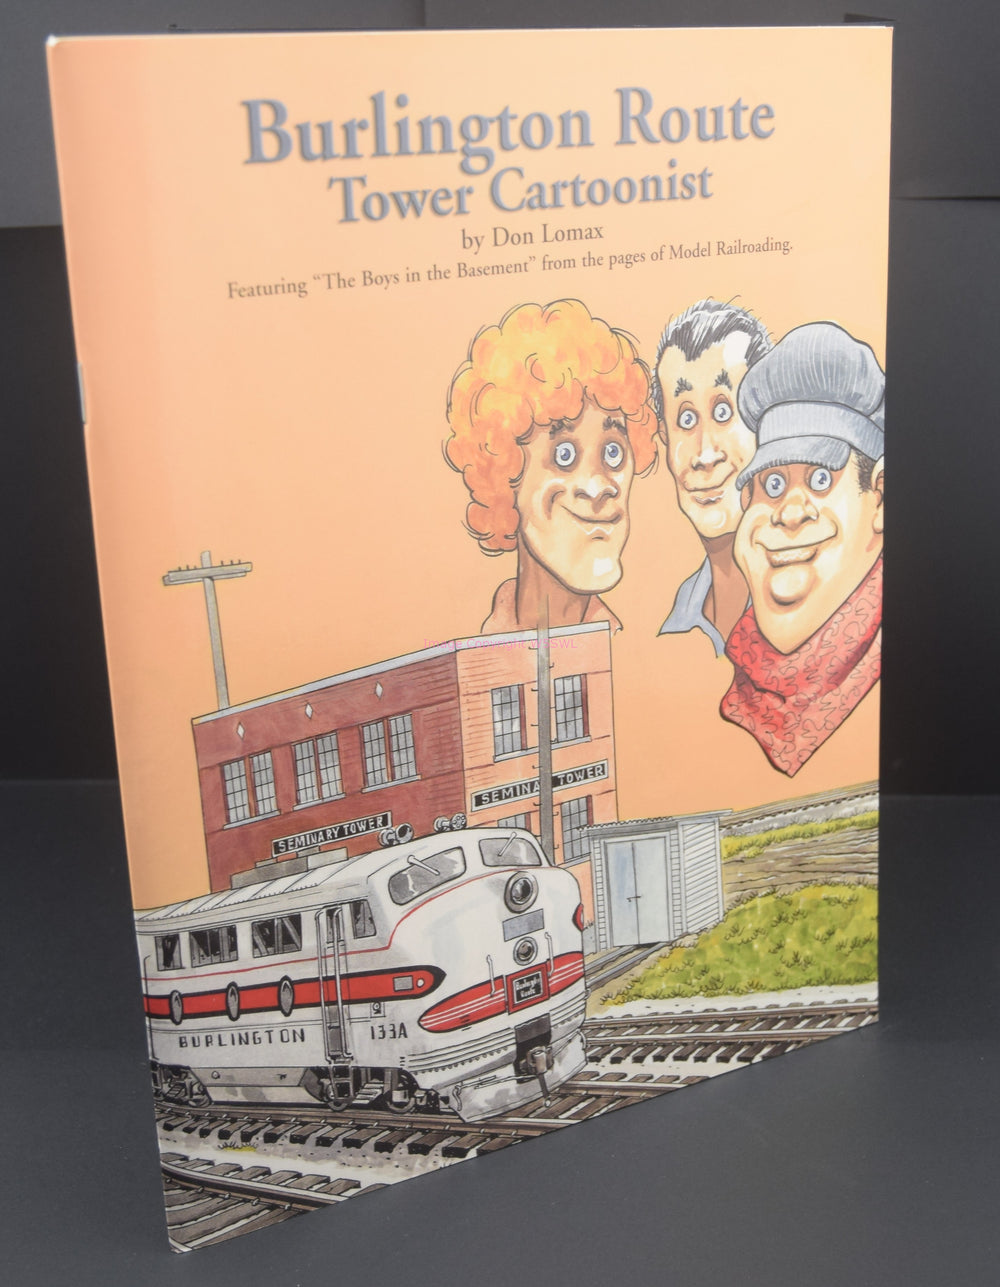 Burlington Route Tower Cartoonist by Don Lomax - Dave's Hobby Shop by W5SWL